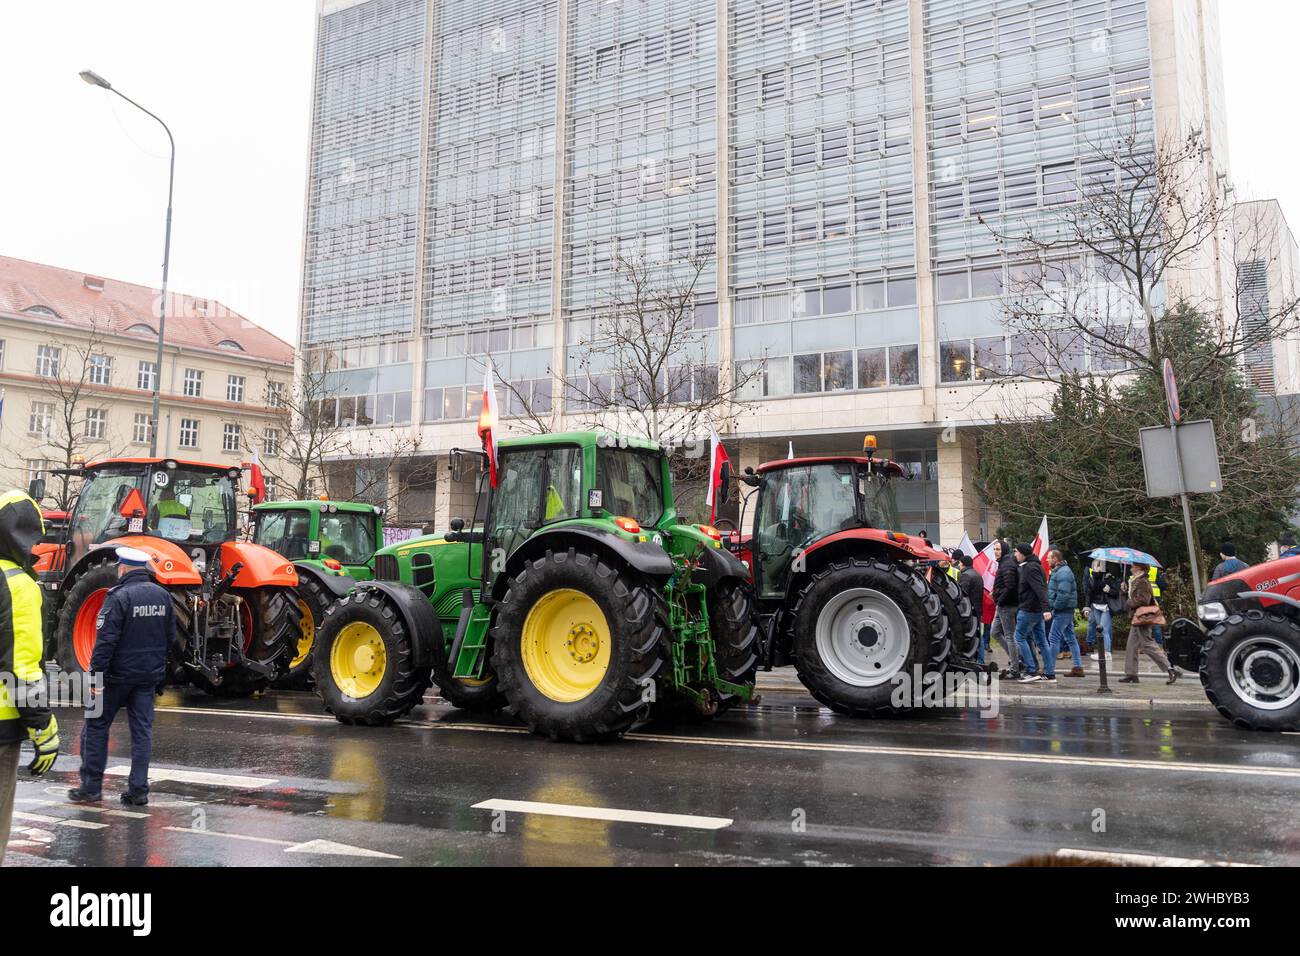 Tractors of Polish farmers slow down traffic in the town Poznan. Around 3k tractors took part in the protest against the inflow of agricultural products into the European Union from Ukraine Farmers protest in Poznan, Poland, February 9, 2024 Copyright: xMarekxAntonixIwanczukx MAI05956 Stock Photo